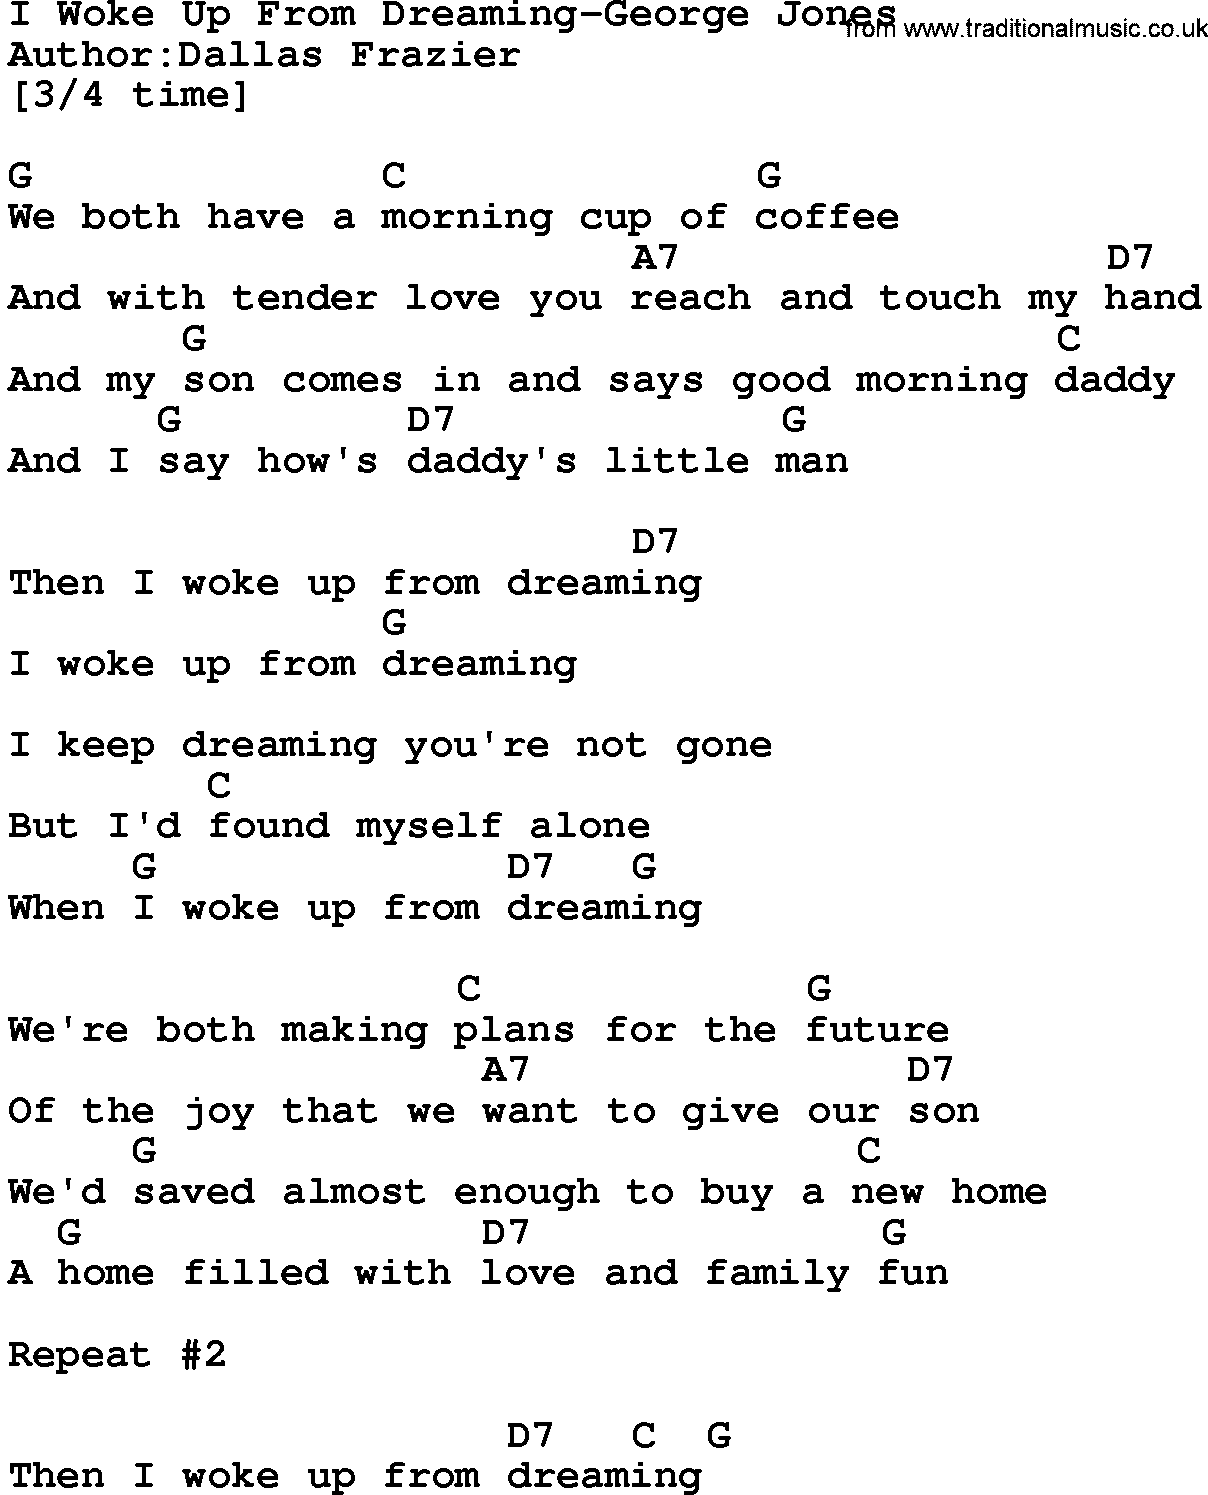 Country music song: I Woke Up From Dreaming-George Jones lyrics and chords